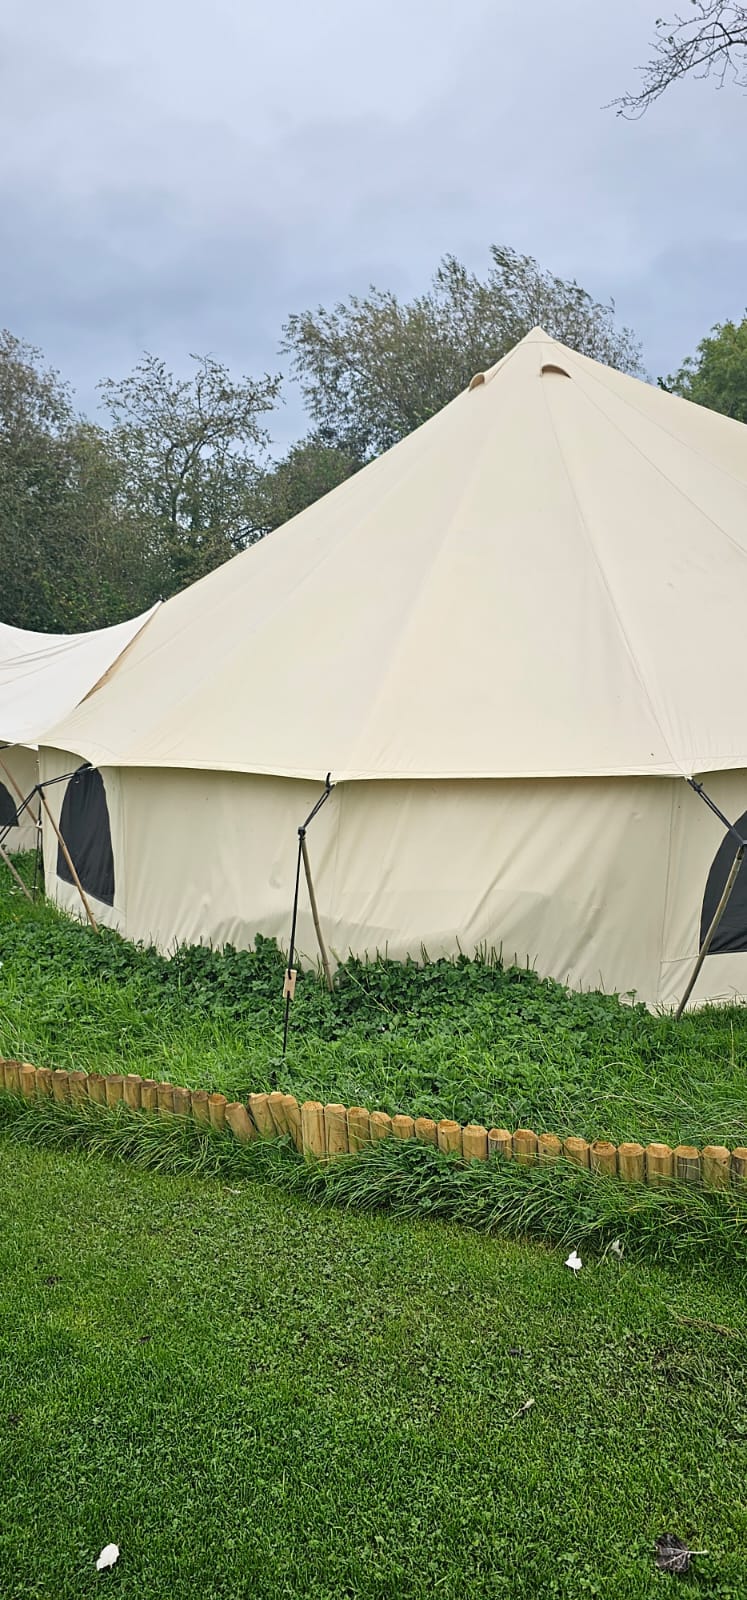 Used BTV 4 7m - 2-Door XL Water Resistant & Fire Retardant Cotton Canvas Bell Tent With Stove Hole - Grade A (light soiling / NO rips or tears)